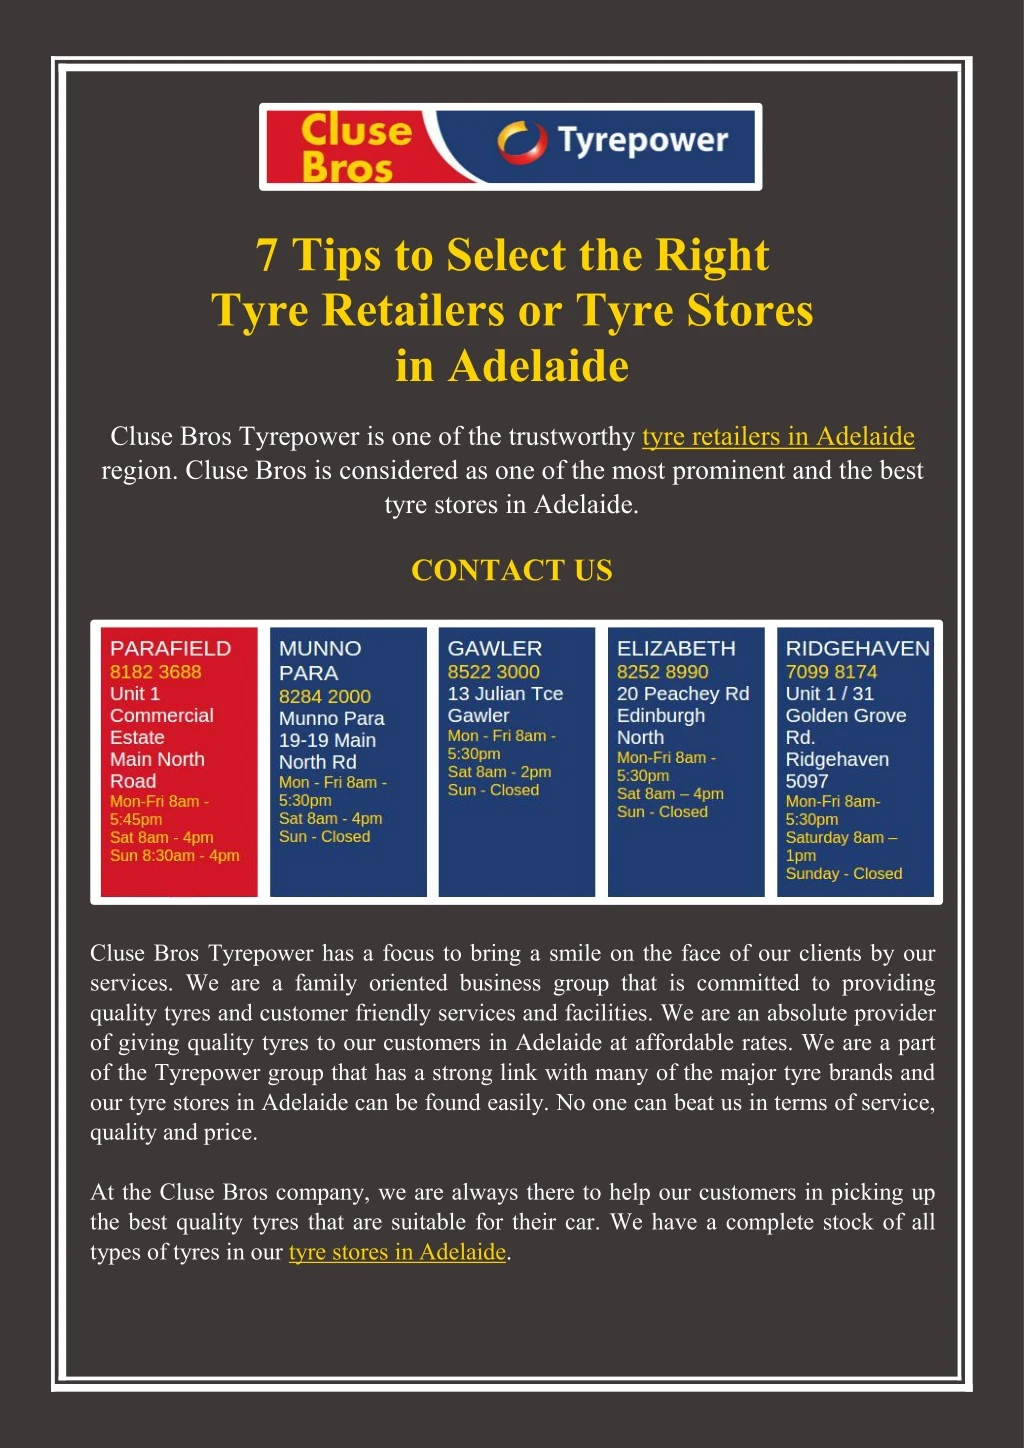 7 tips to select the right tyre retailers or tyre